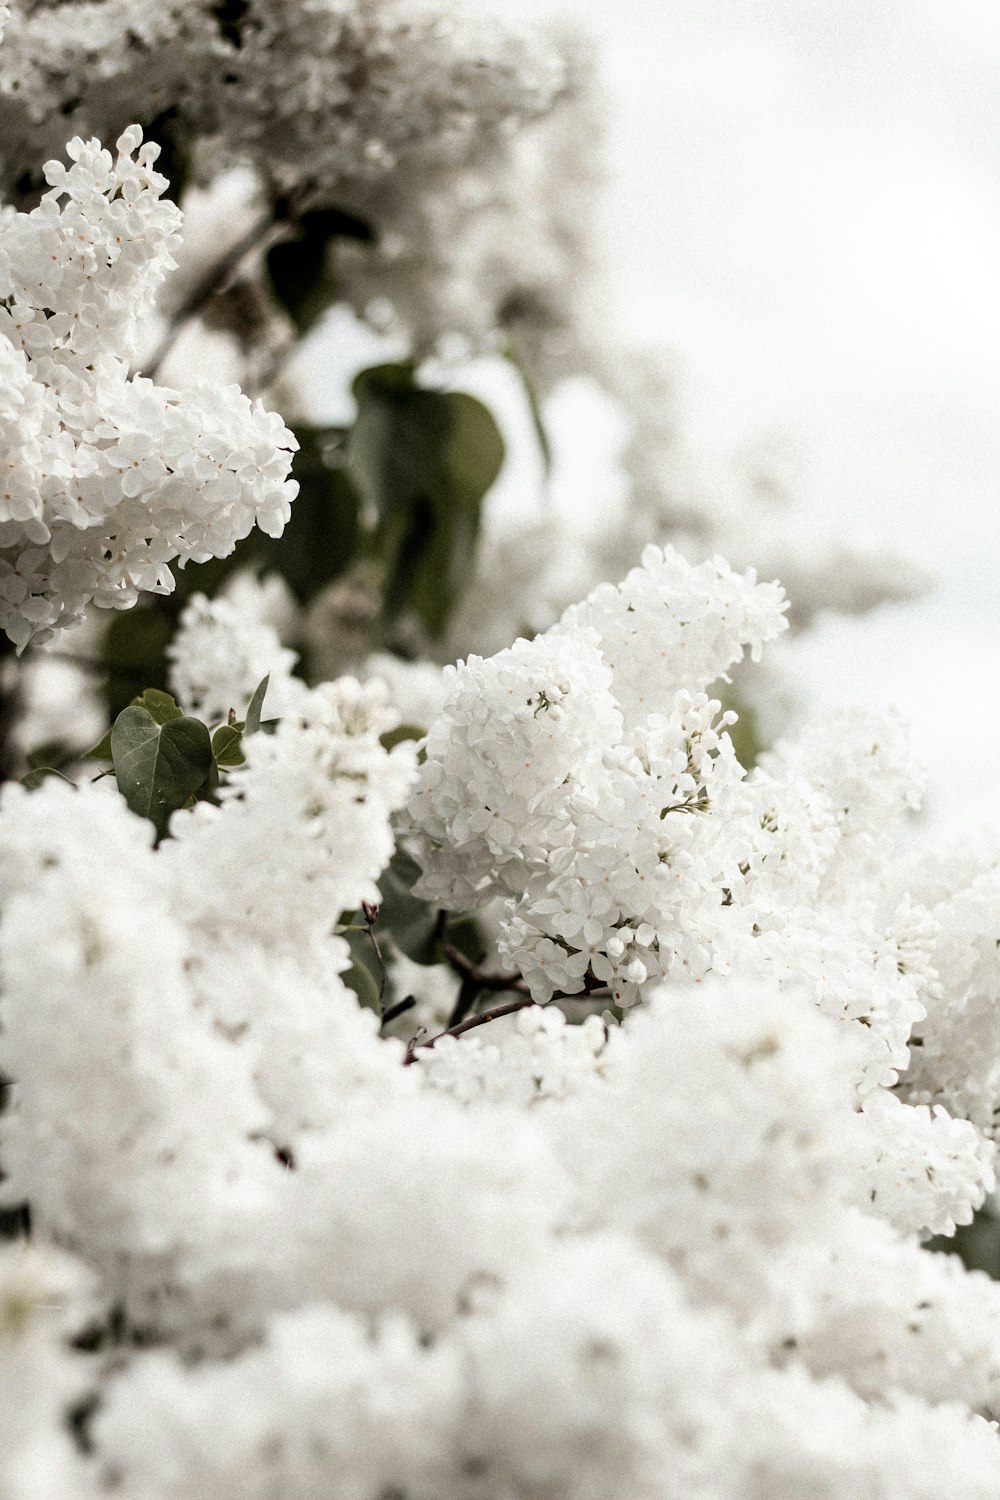 a close up of white flowers on a tree